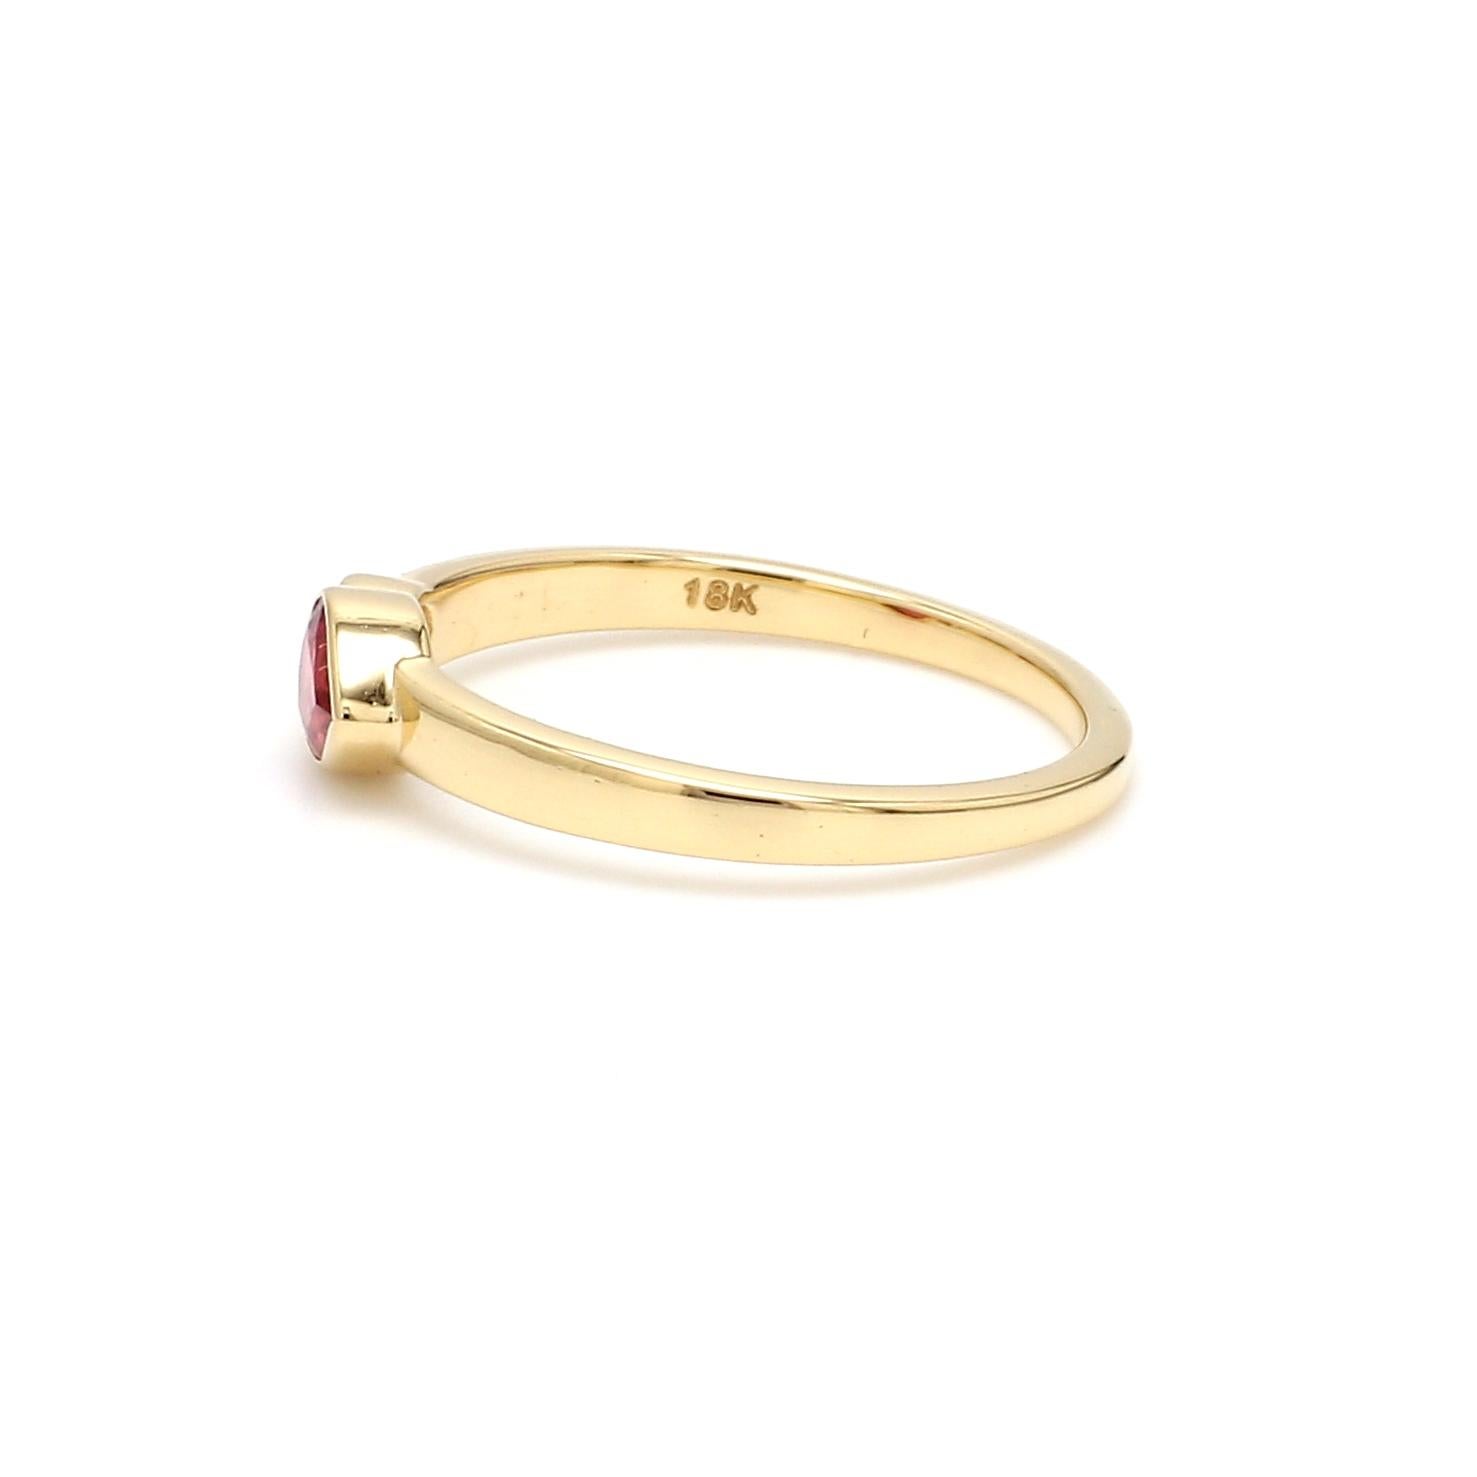 A Beautiful Handcrafted Ring in 18 Karat Yellow Gold  with Natural Mozambique Ruby of No Heat in Emerald cut shape and Diamonds on Shank. A perfect Ring for occasion

Ruby Details
Pieces : 01 Pieces 
Weight : 0.38 Carat 
AAA Quality Ruby

Natural